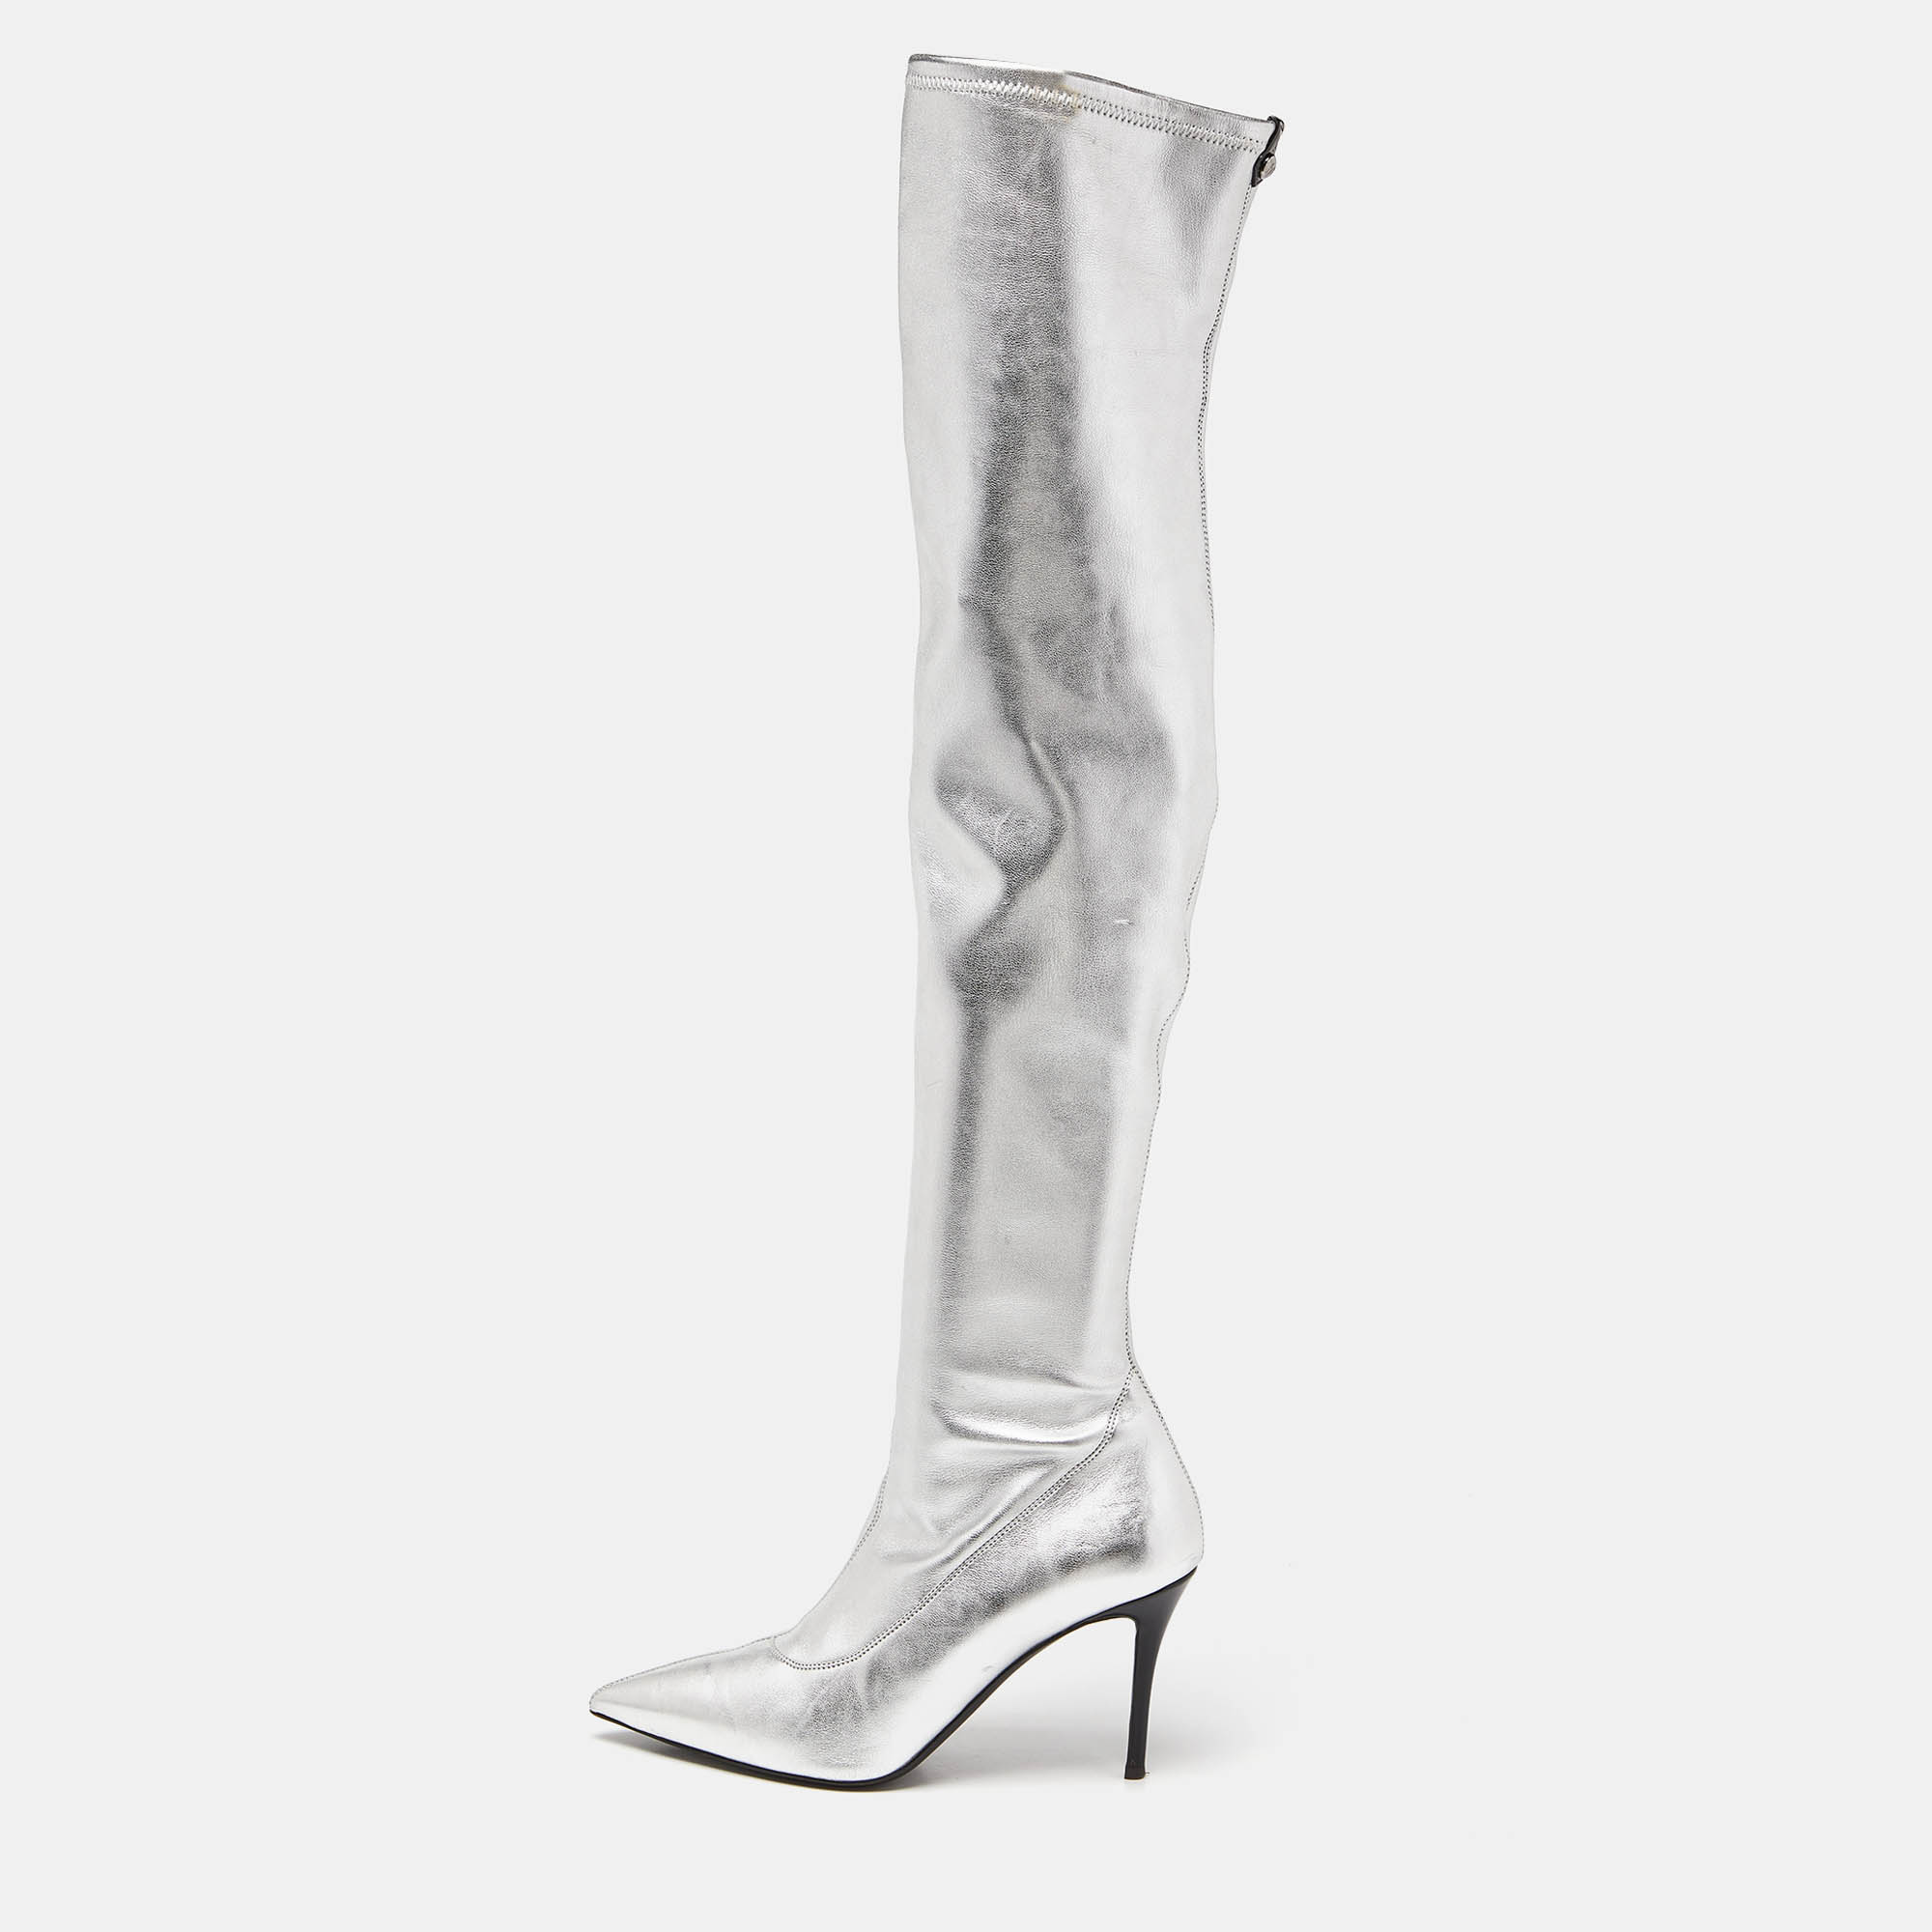 Giuseppe zanotti silver foil leather over the knee pointed toe boots size 40